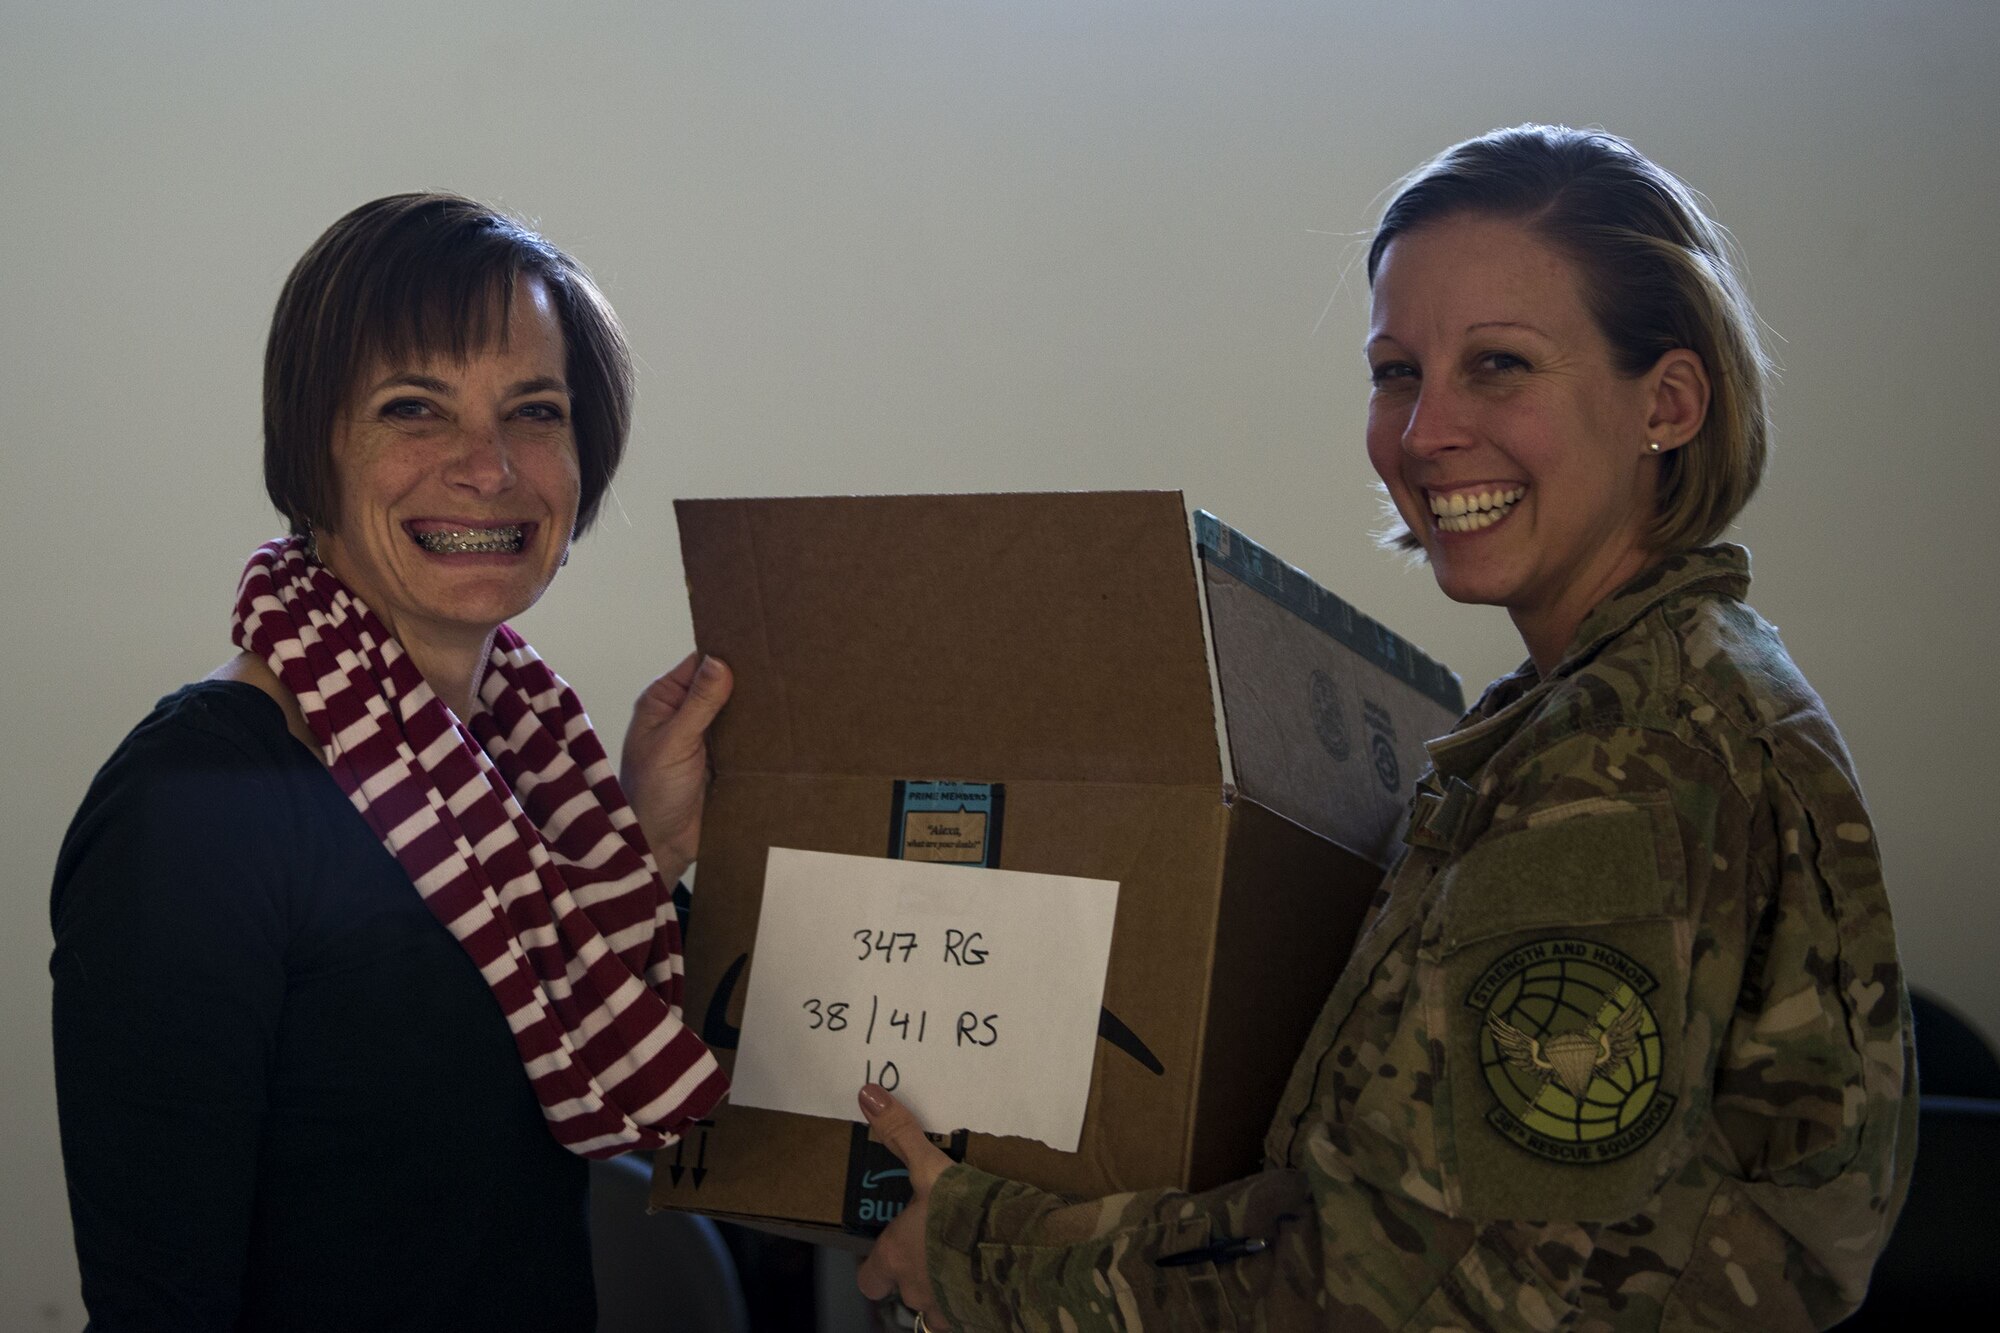 Stacey Gingrich, left, spouse of Col. Jason Gingrich, 347th Rescue Group commander, and Master Sgt. Stephanie Ruepp, 38th Rescue Squadron unit training manager, pose for a photo during the Annual Moody Airmen Cookie Drive, Dec. 4, 2017, at Moody Air Force Base, Ga. Local organizations, Airmen and spouses donated more than 8,000 cookies to approximately 700 dorm residents to show appreciation for the Airmen during the holidays. (U.S. Air Force photo by Airman 1st Class Erick Requadt)